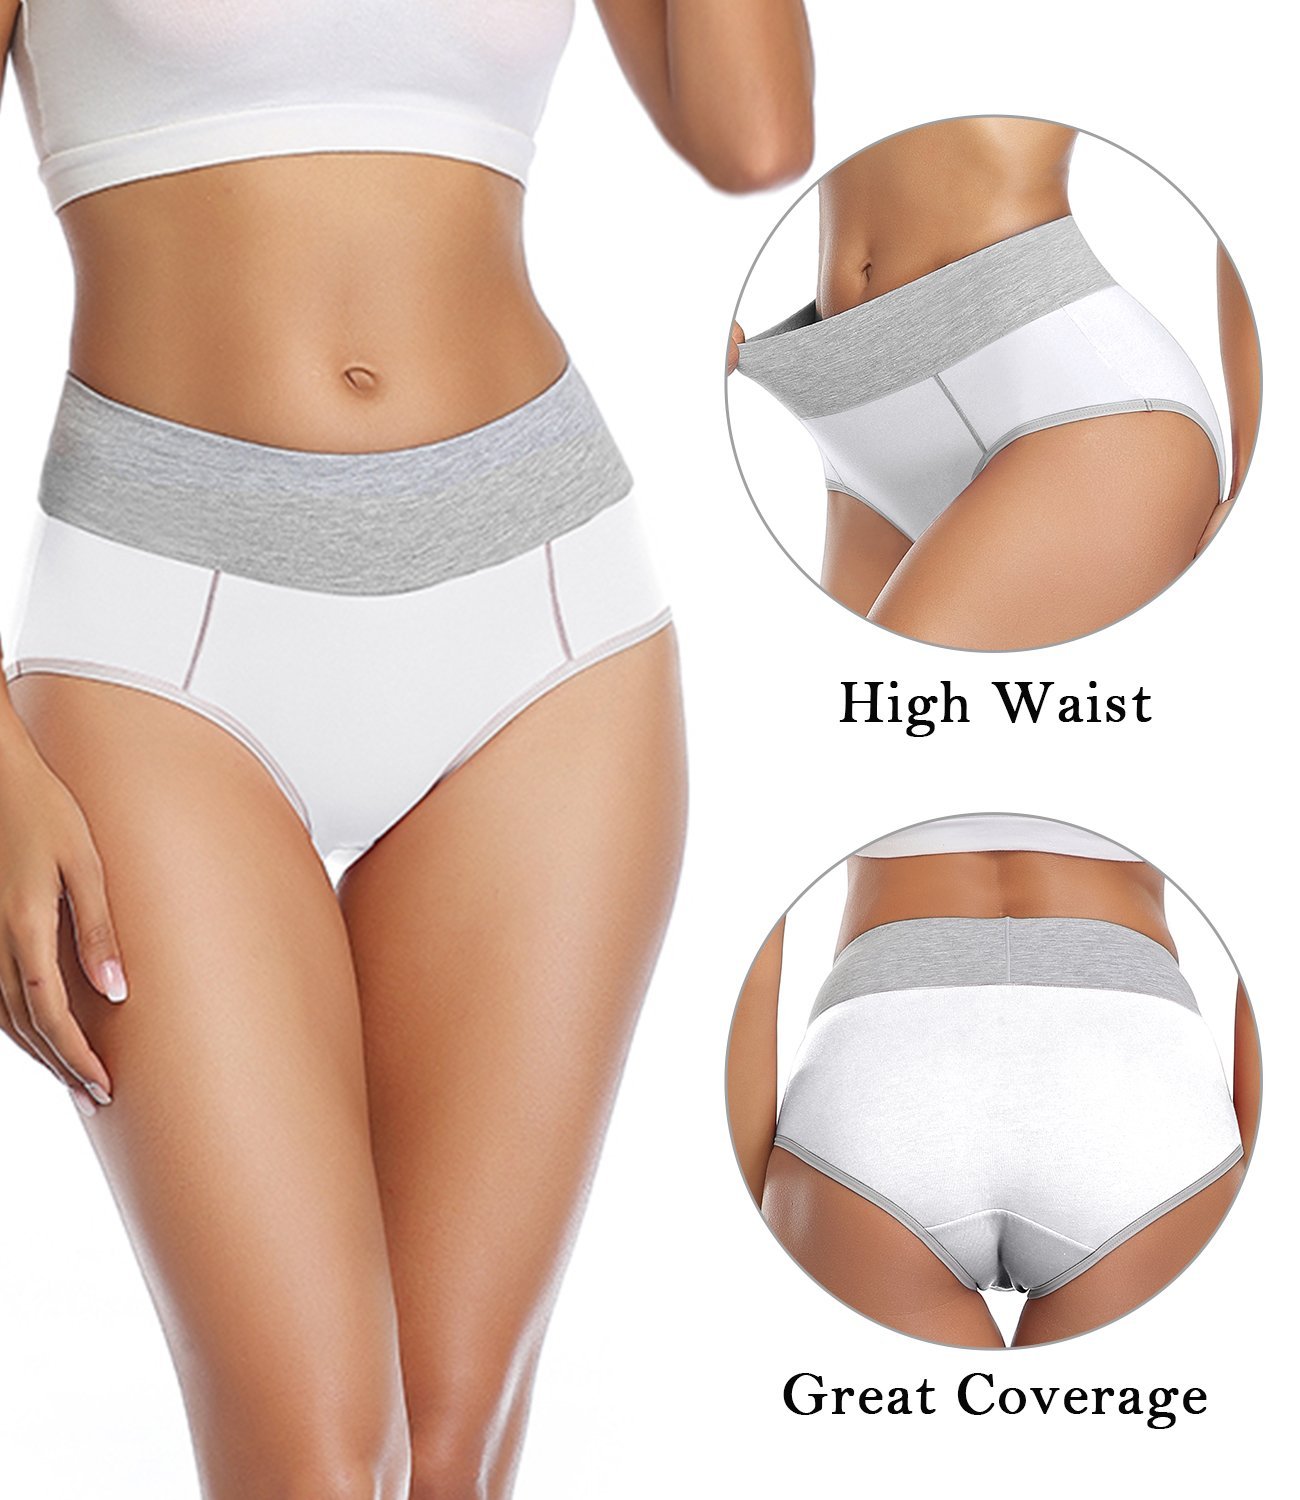 wirarpa Women's 5 Pack Cotton Underwear High Waisted Full - Import It All